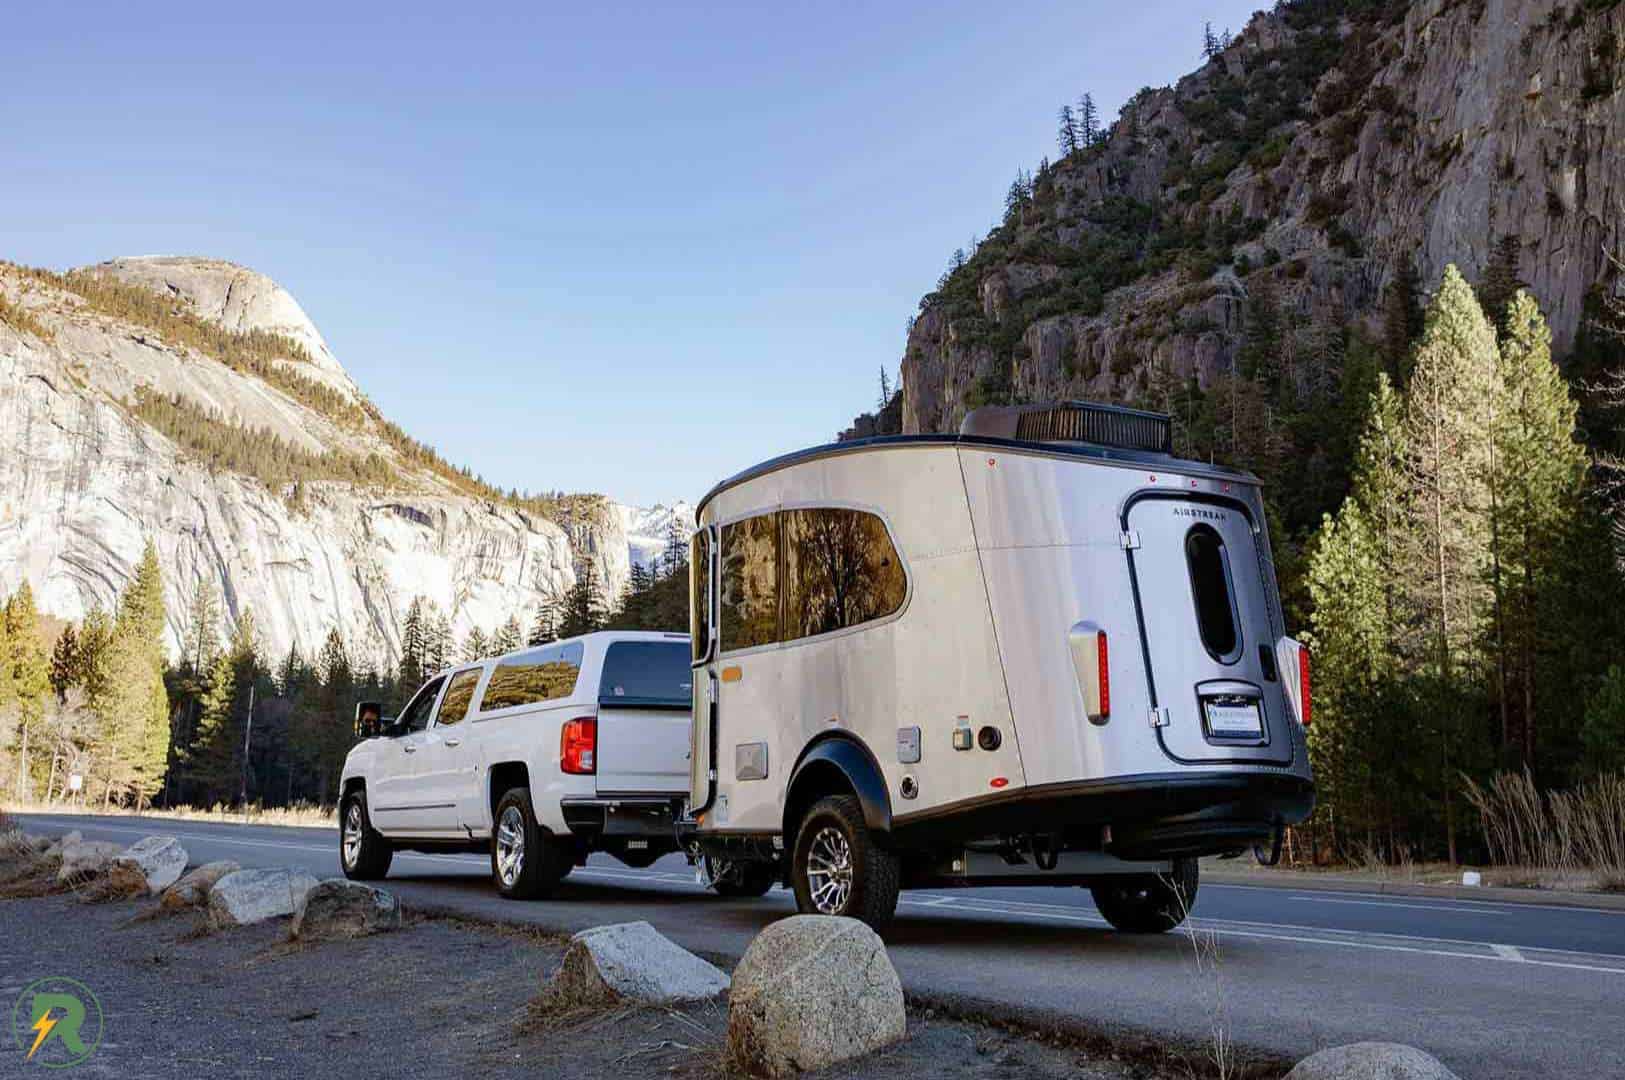 Top 10 Awesome Small Camping Trailers with Bathrooms